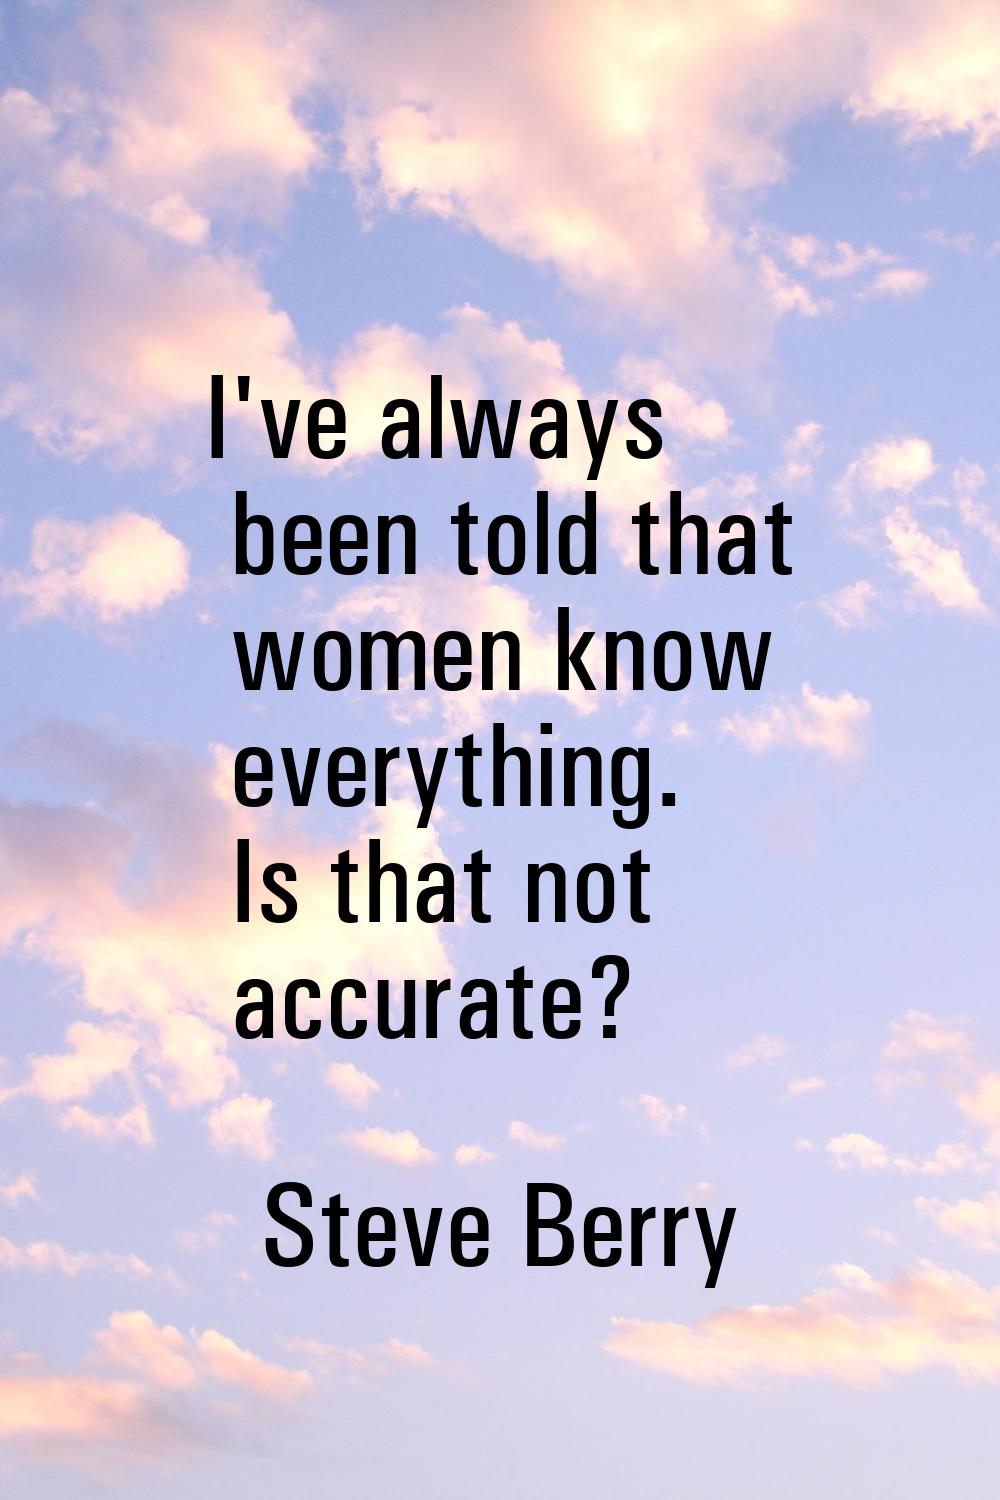 I've always been told that women know everything. Is that not accurate?